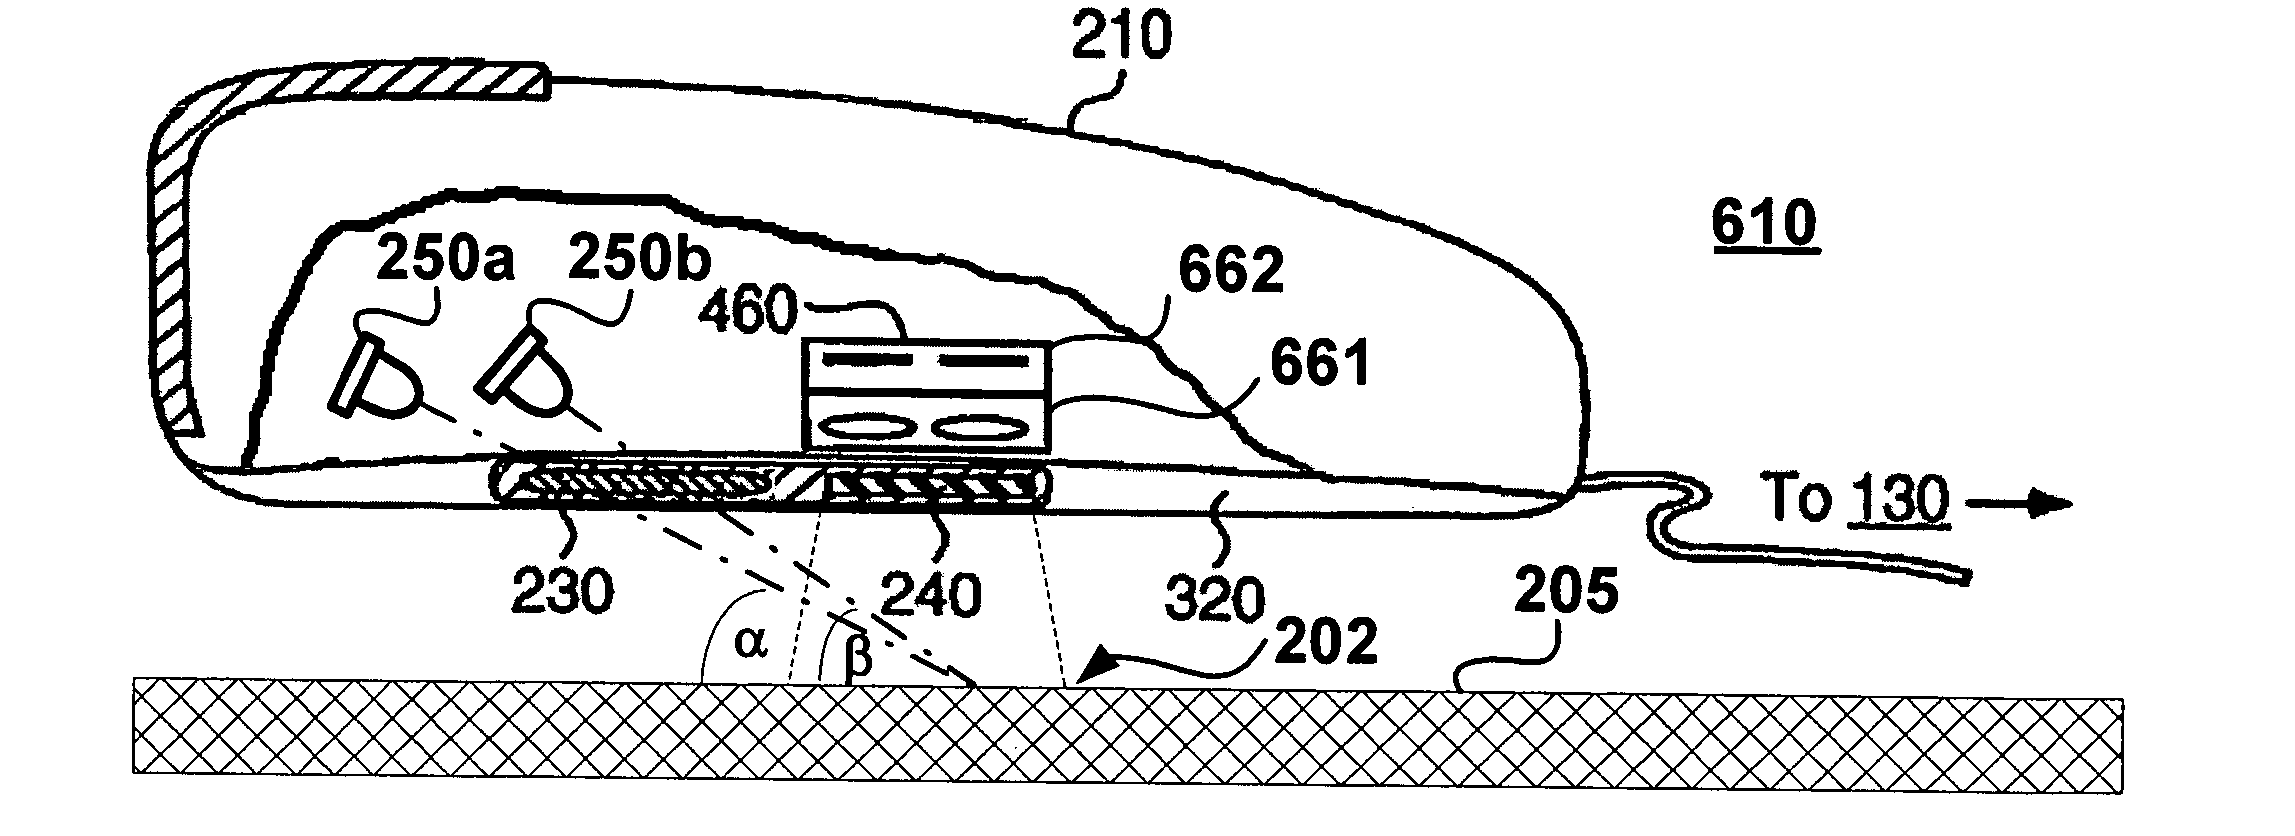 Multi-light-source illumination system for optical pointing devices